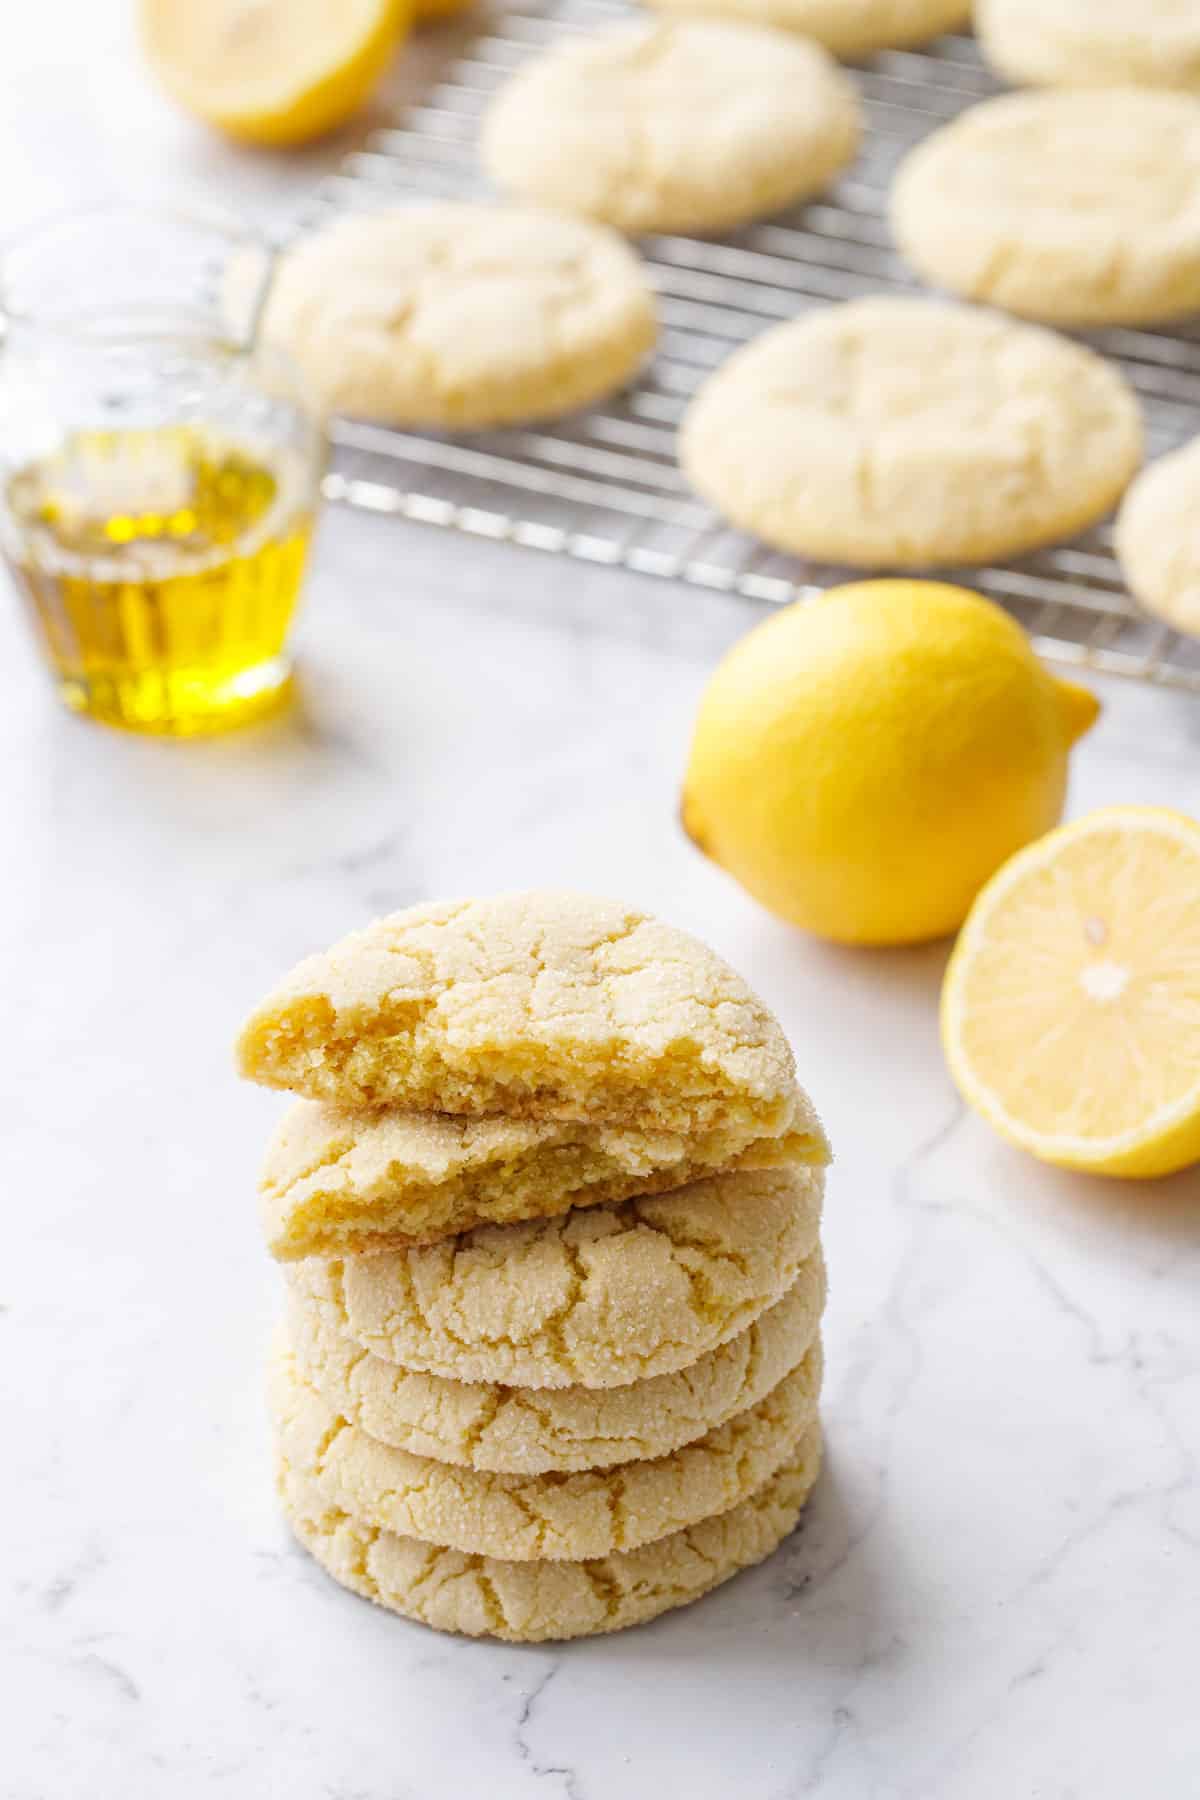 Stack of Lemon Olive Oil Sugar Cookies with the top cookie broken in half to show texture, rack of cookies plus lemons and a carafe of olive oil in the background.